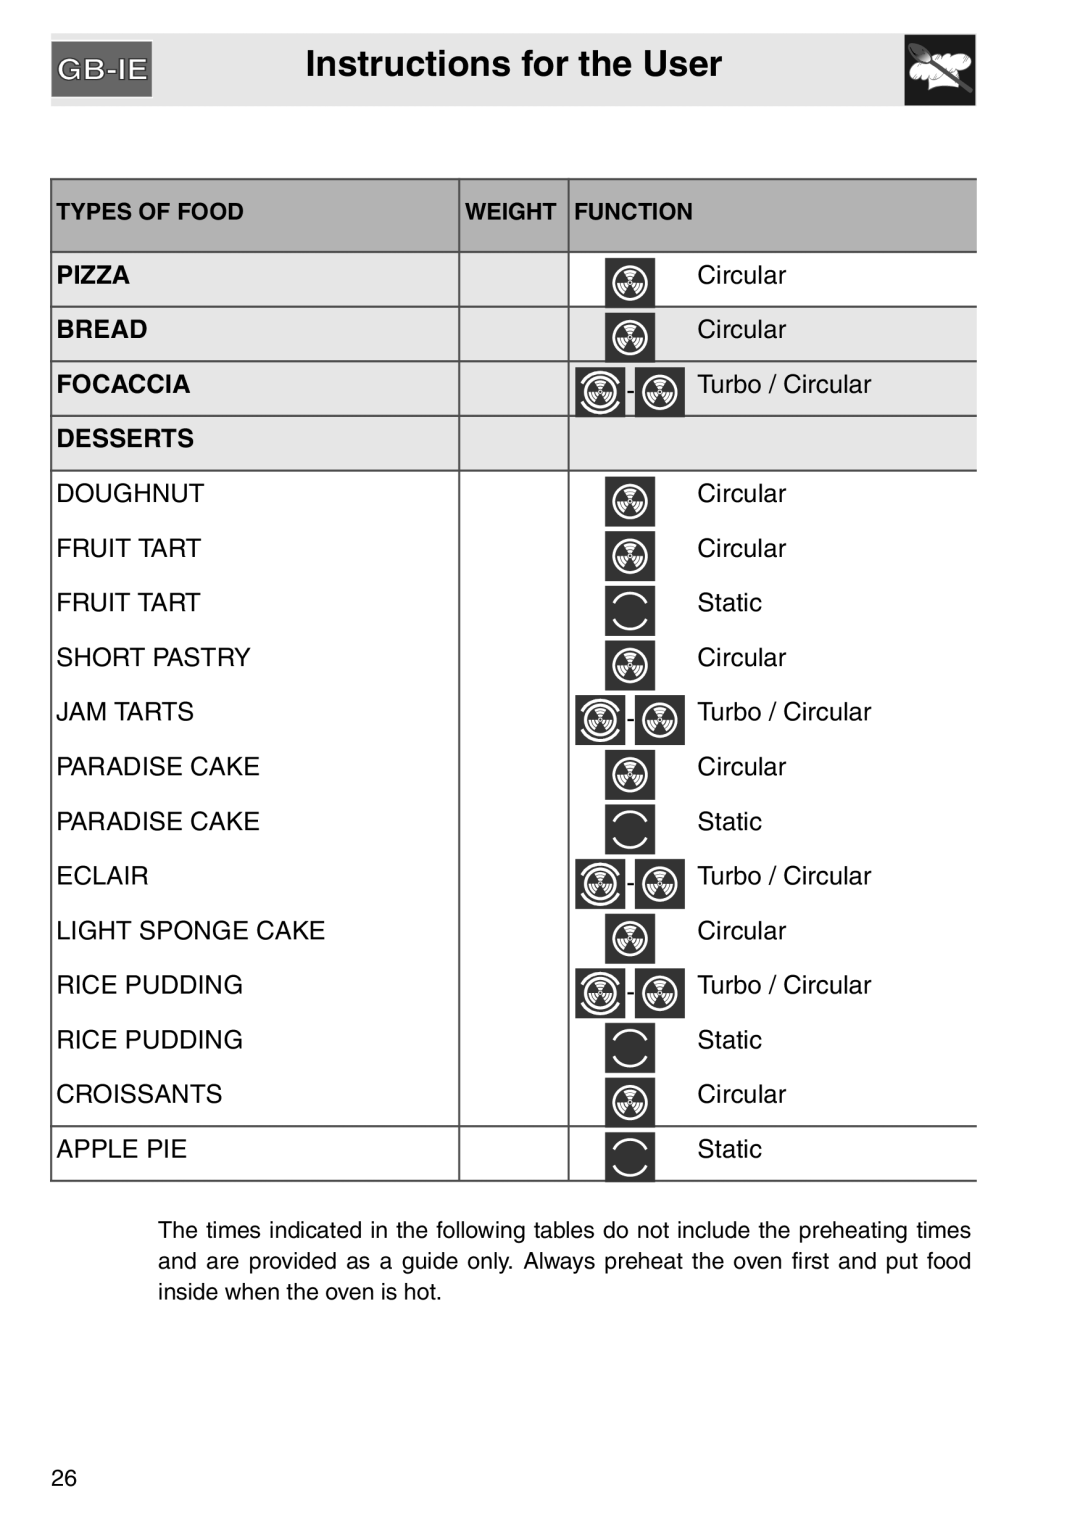 Smeg SAP306X-9, electric oven installation instructions Pizza, Bread, Focaccia, Desserts, Instructions for the User 